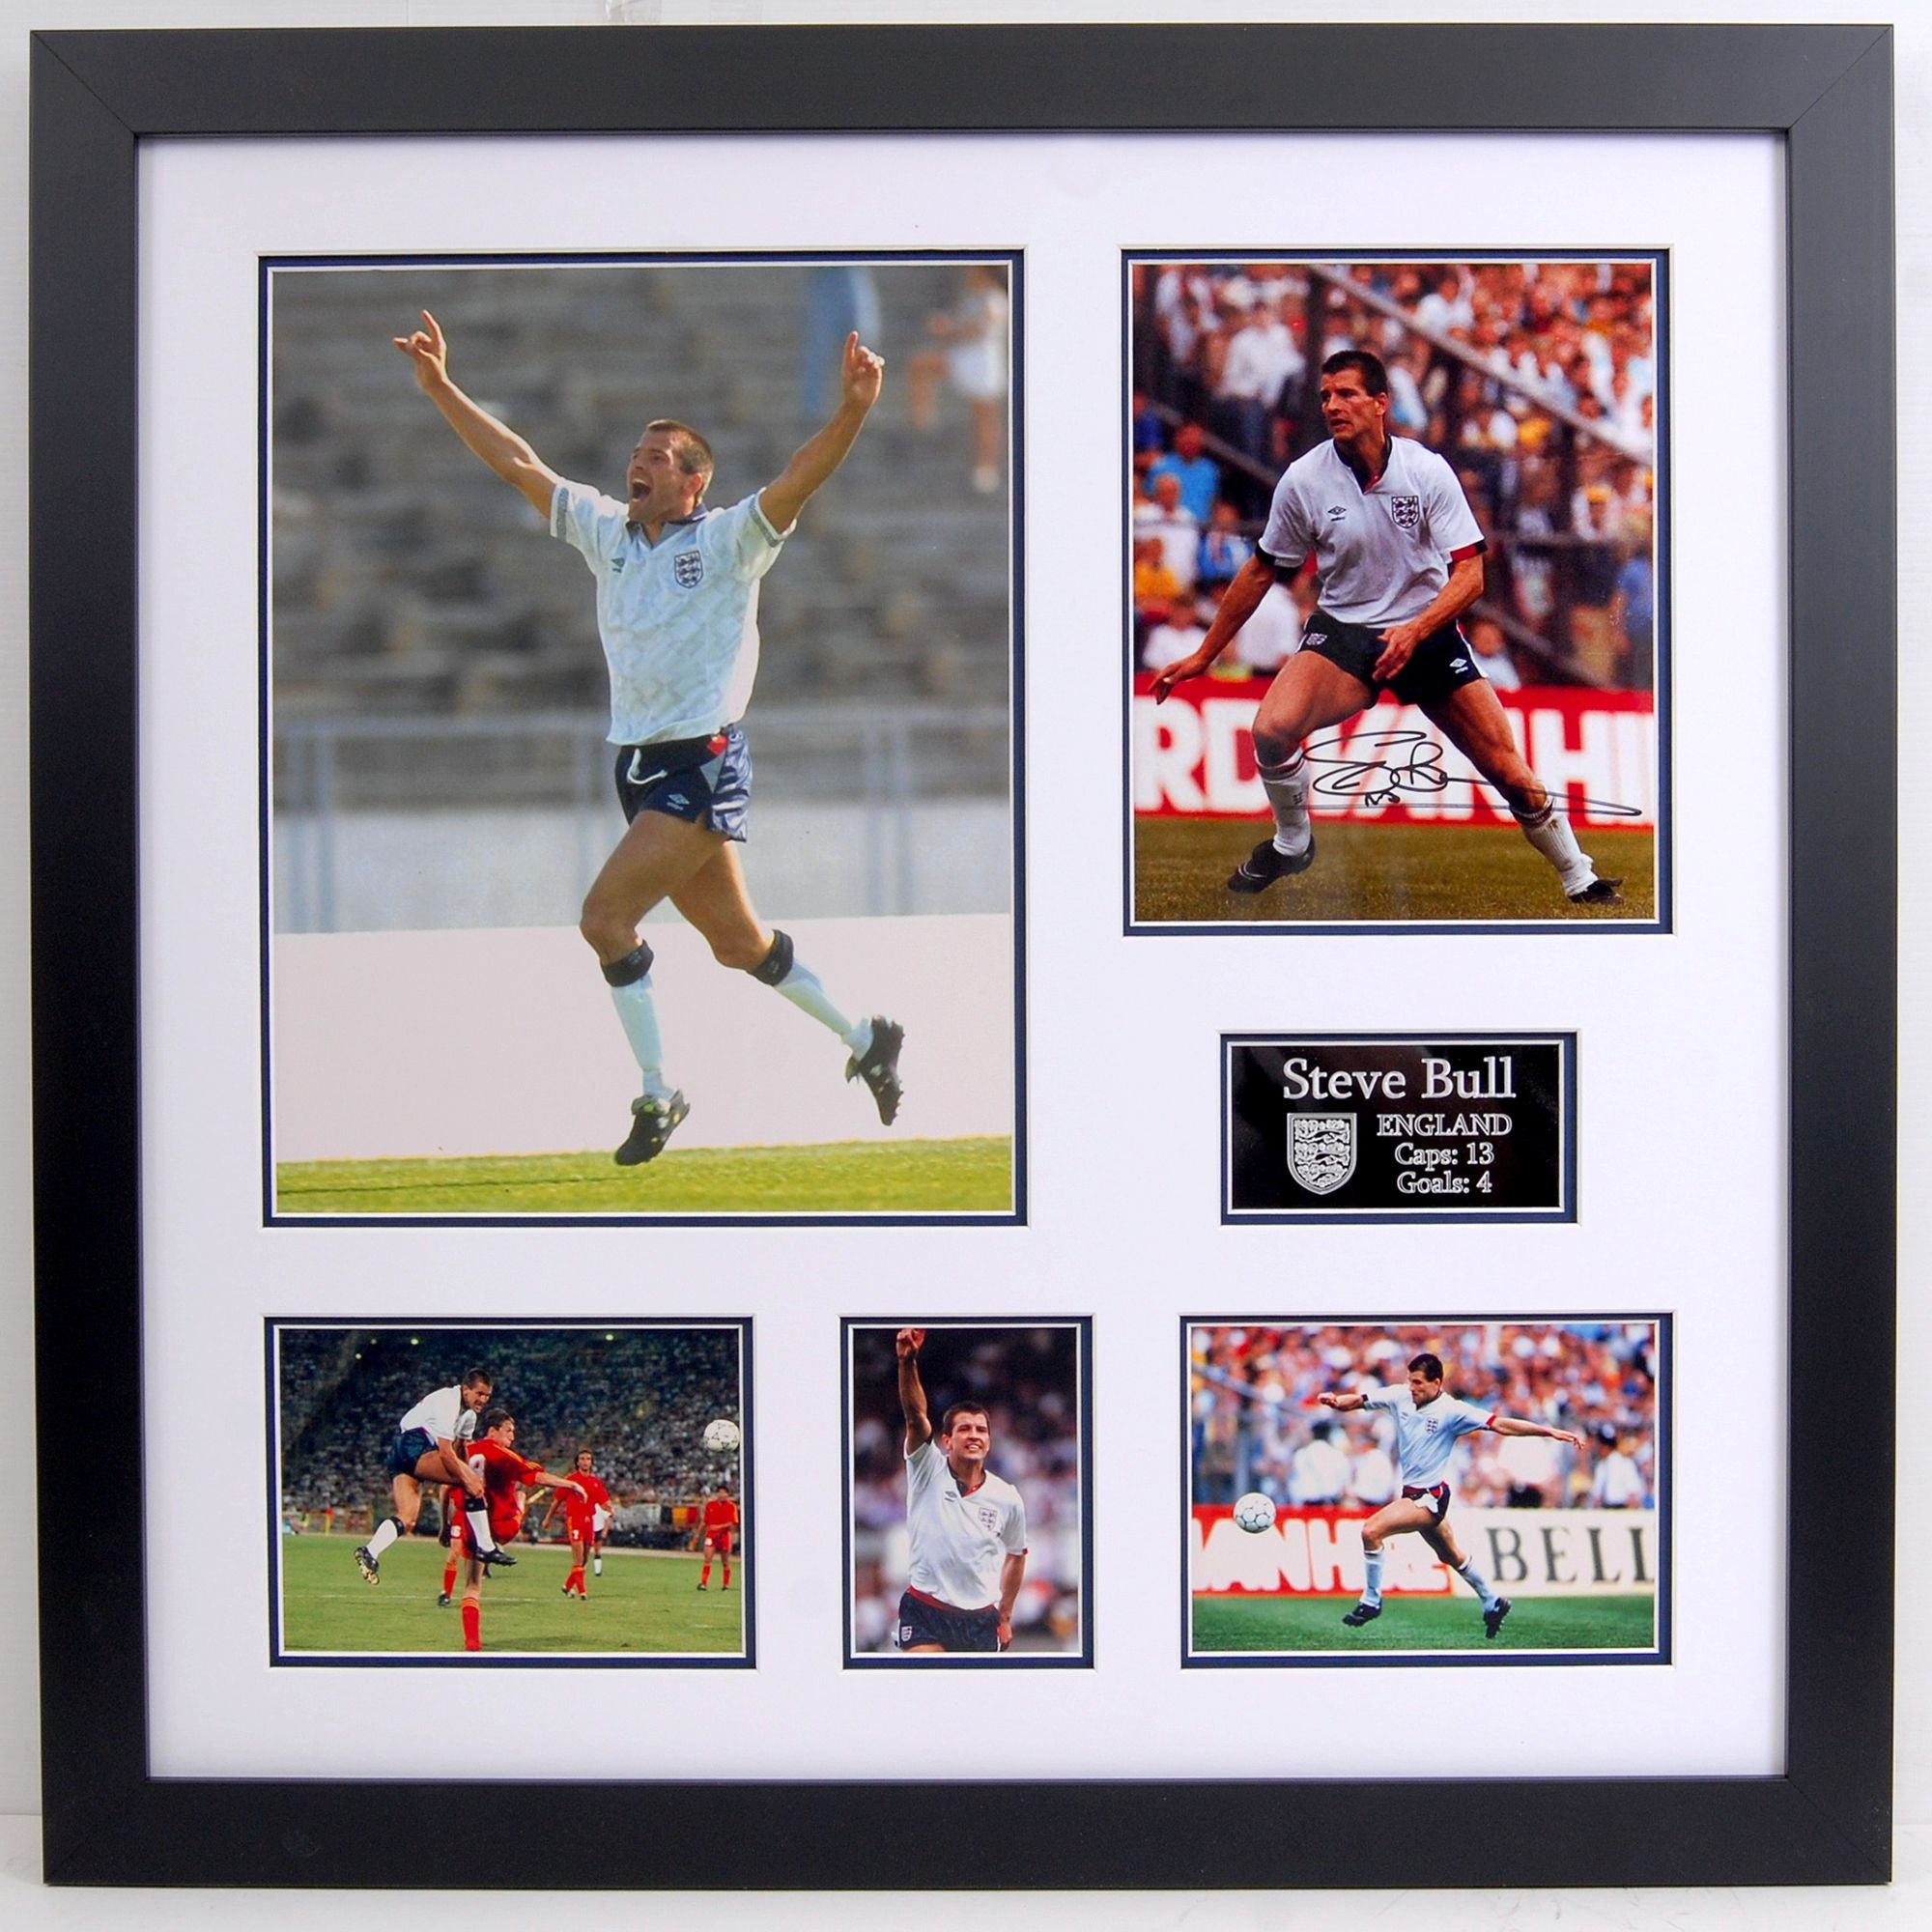 Steve Bull. England. 1989-1990. Signed Frame with England career pictures and press photo.